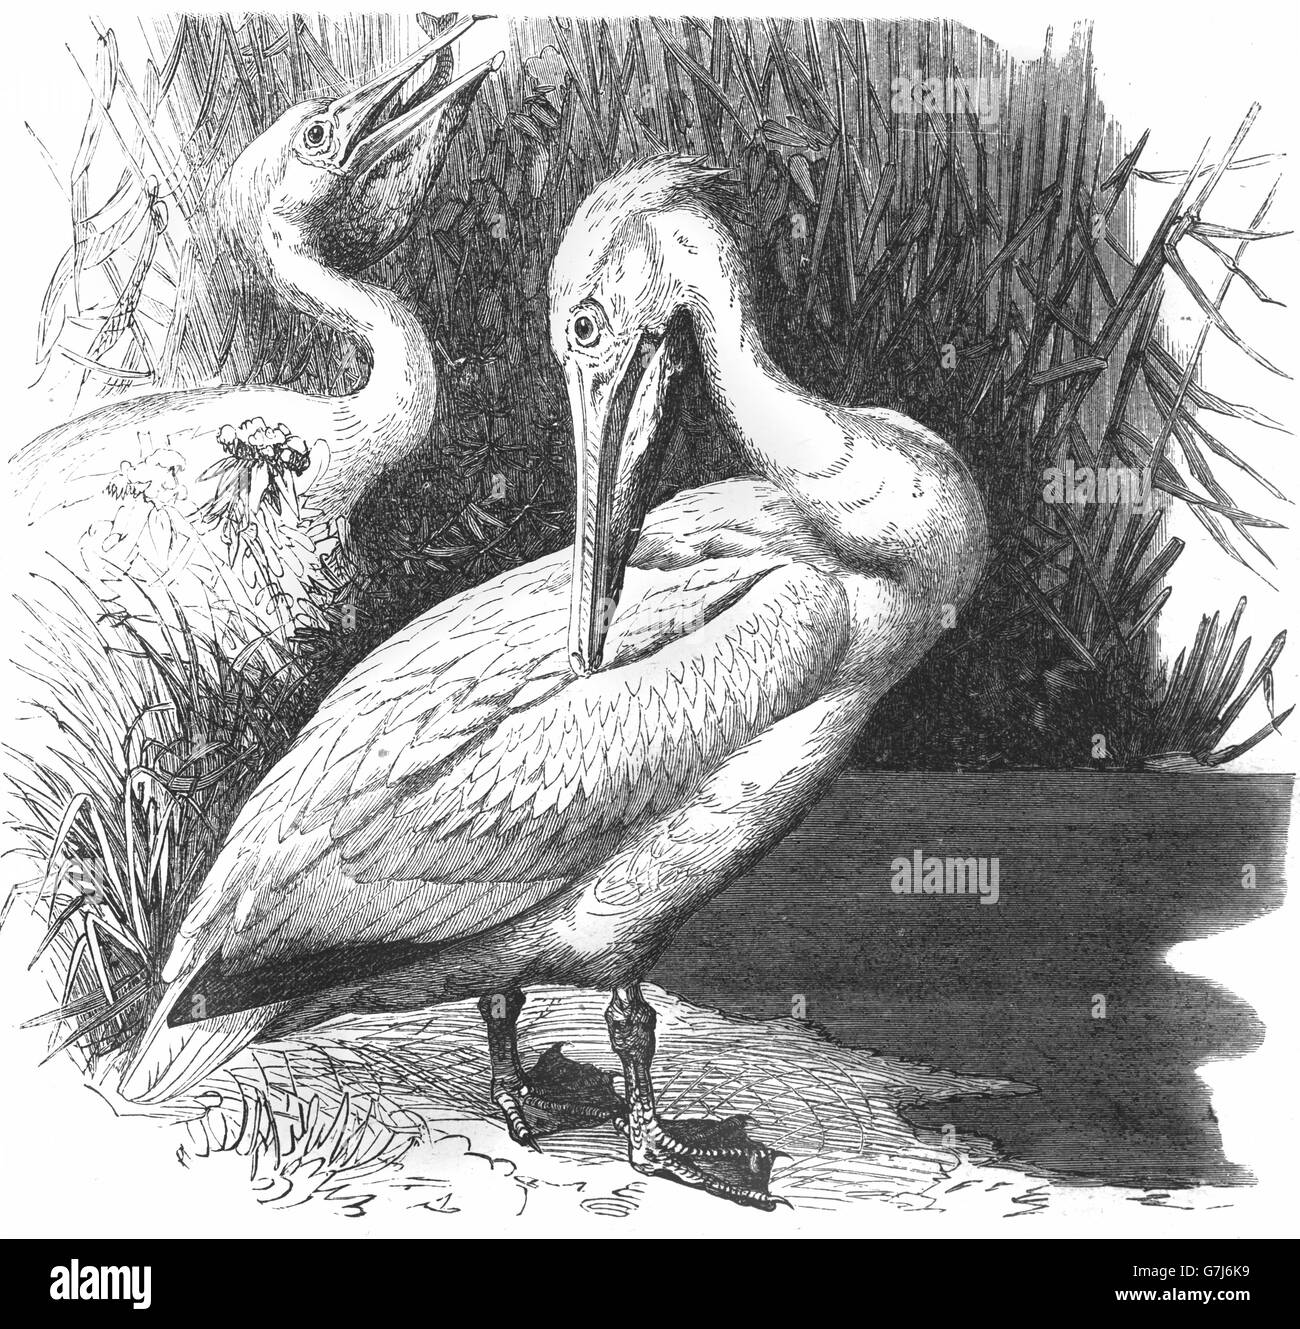 Great white pelican, Pelecanus onocrotalus, rosy pelican, Pelecanidae, illustration from book dated 1904 Stock Photo